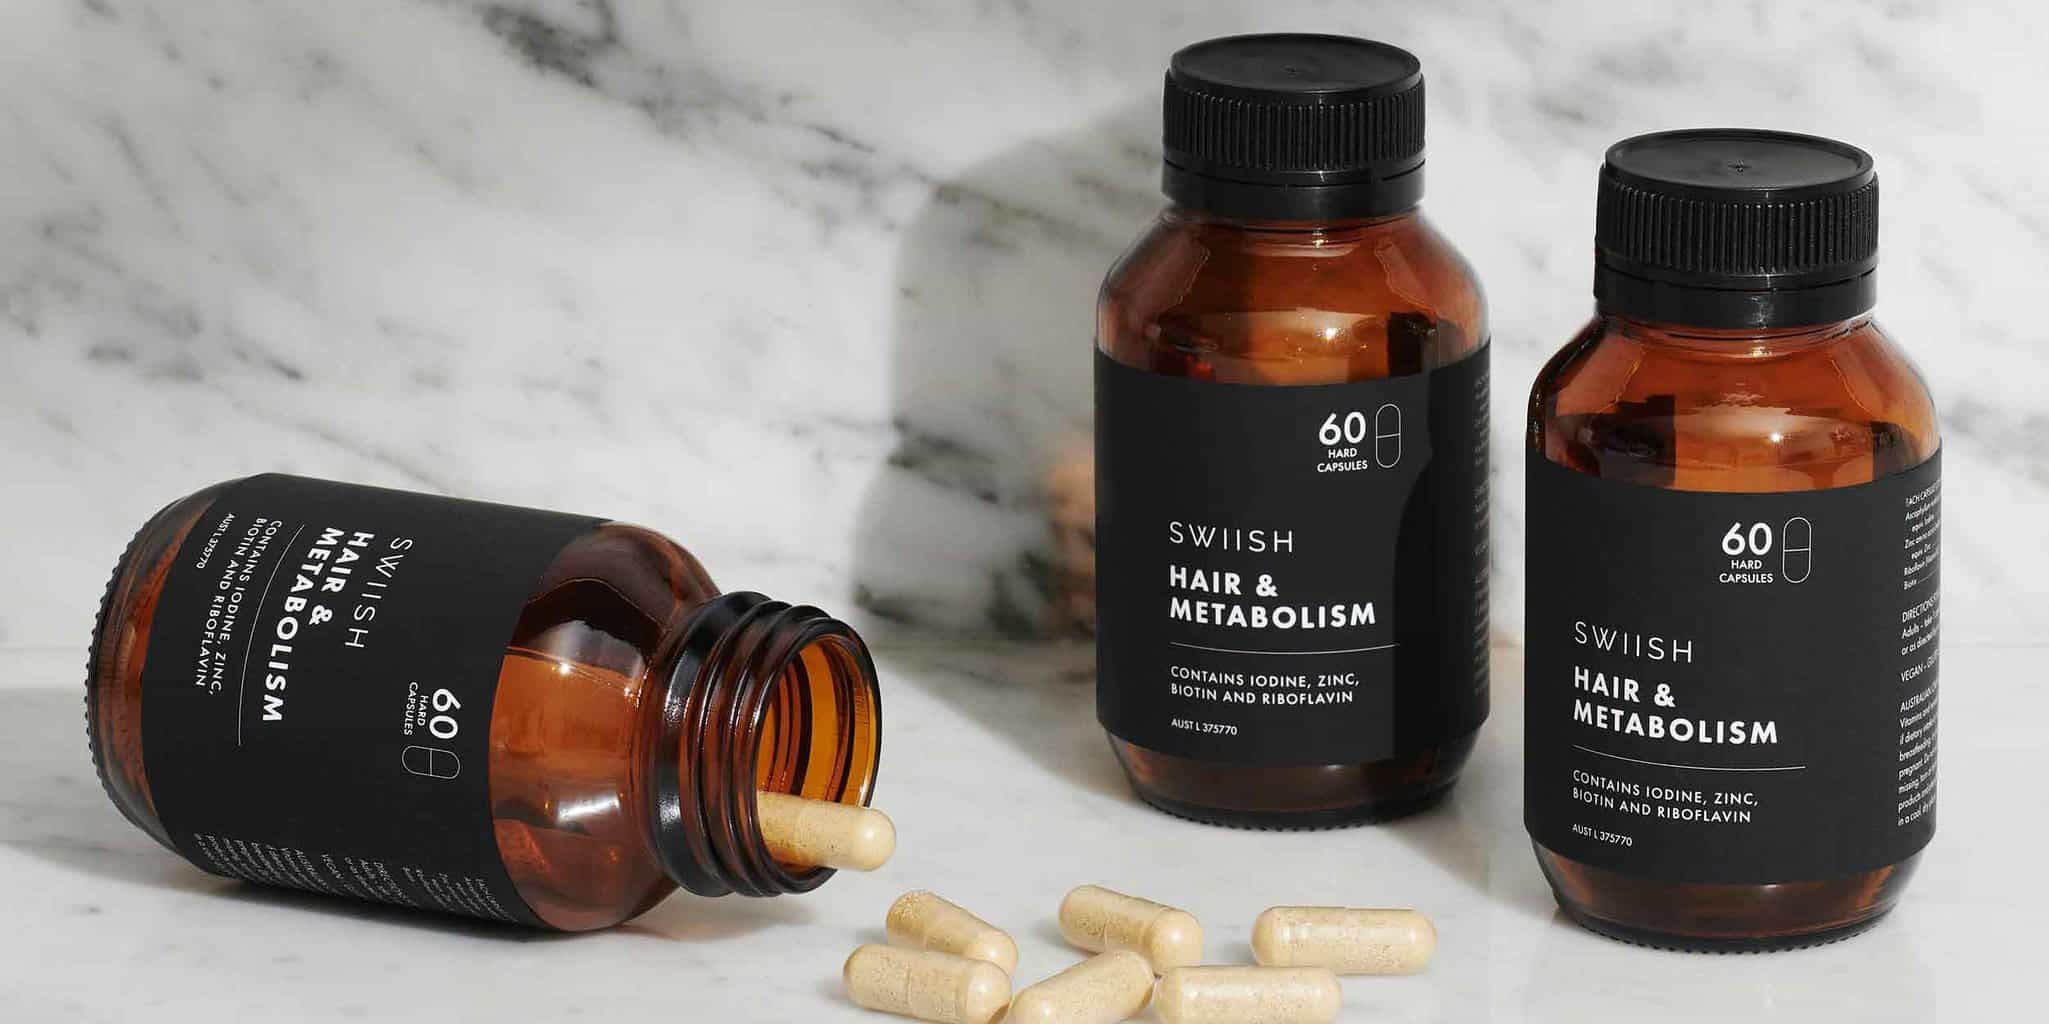 Three bottles of SWIISH Hair & Metabolism supplement with one bottle lying on its side with capsules spilling out